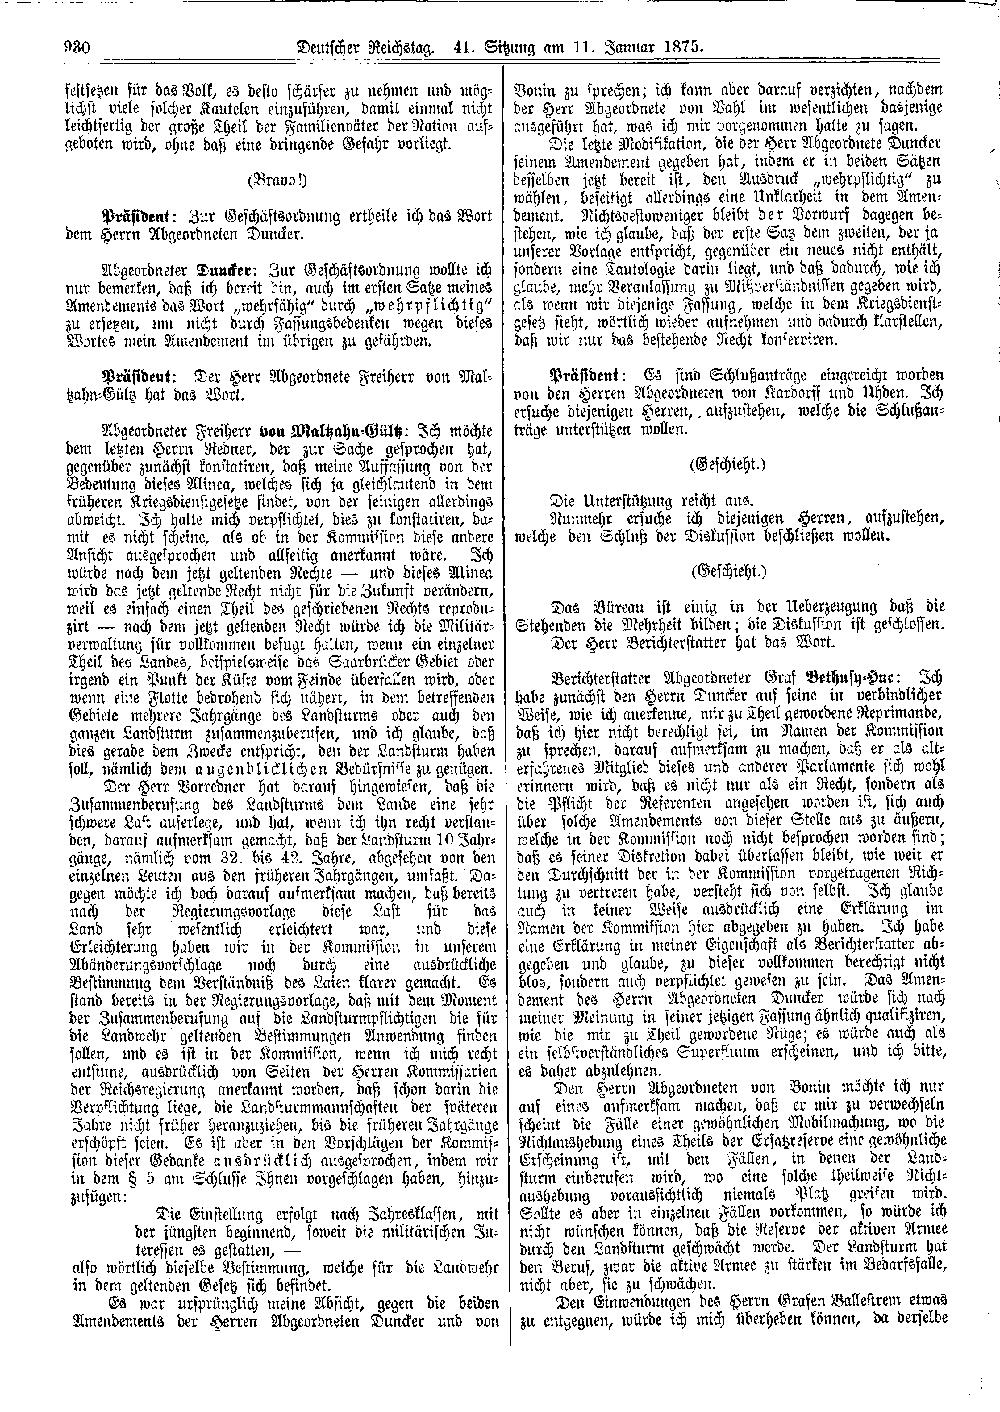 Scan of page 930